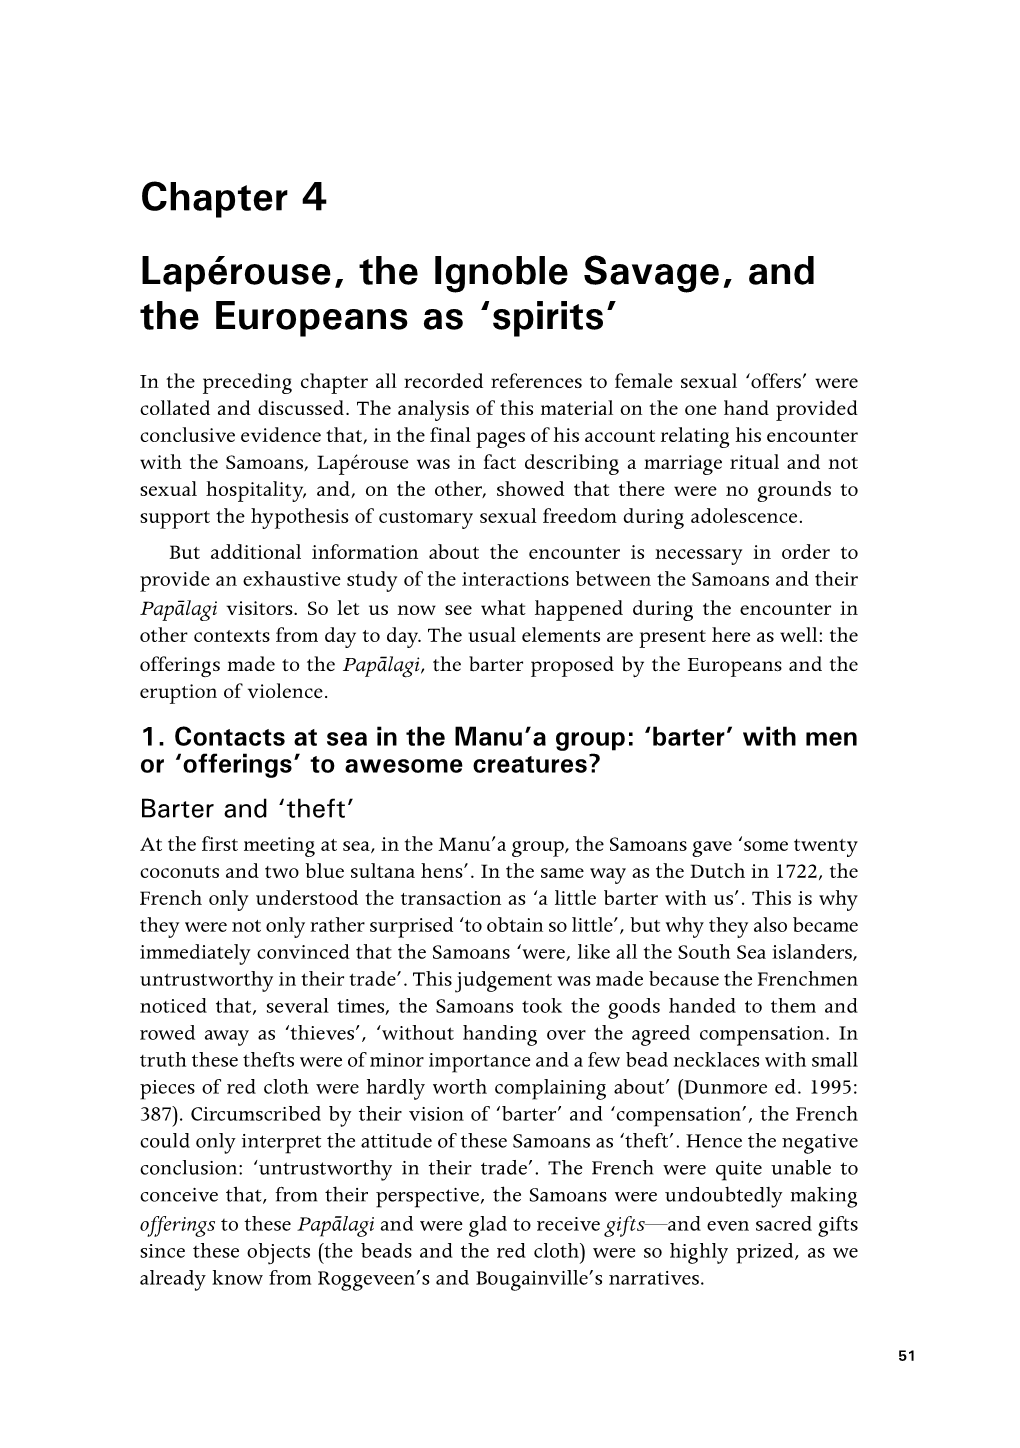 Lapérouse, the Ignoble Savage, and the Europeans As 'Spirits'